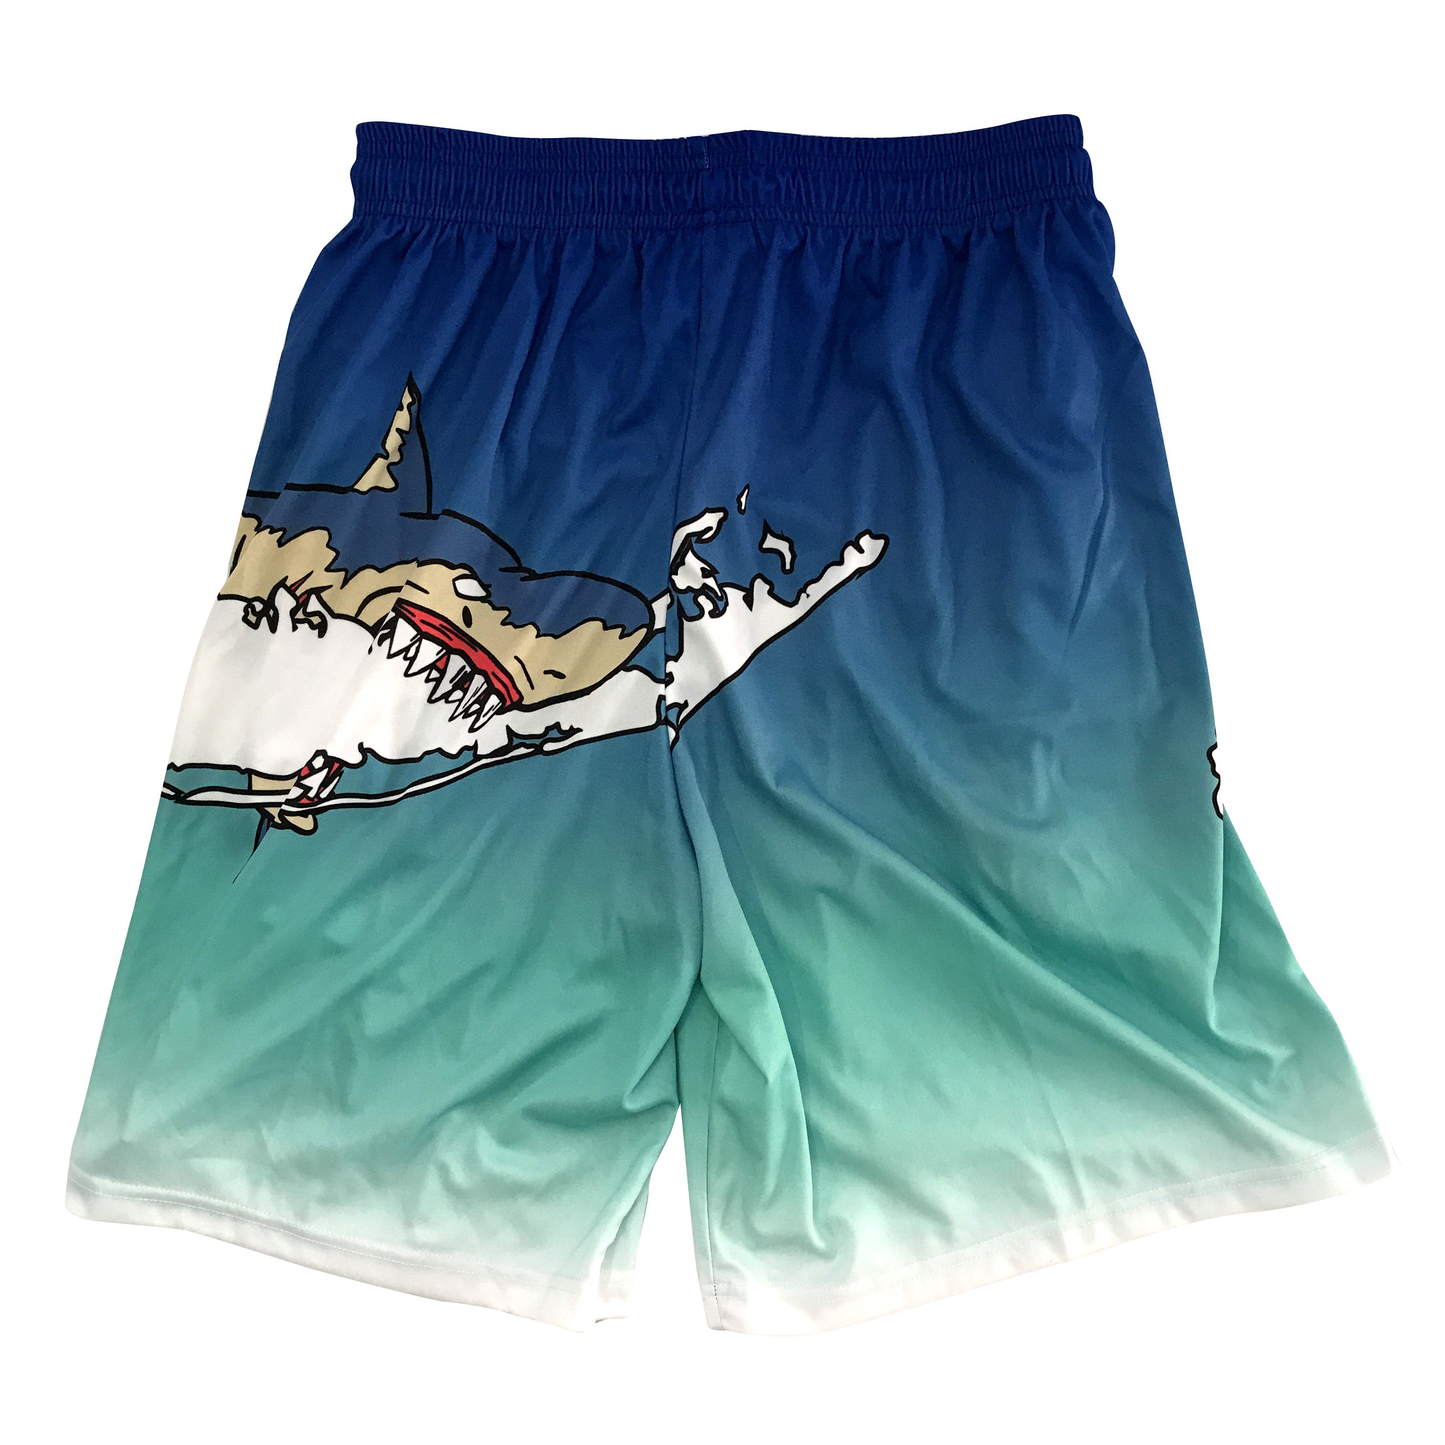 Lacrosse Shorts Nautical Collection: The Shark